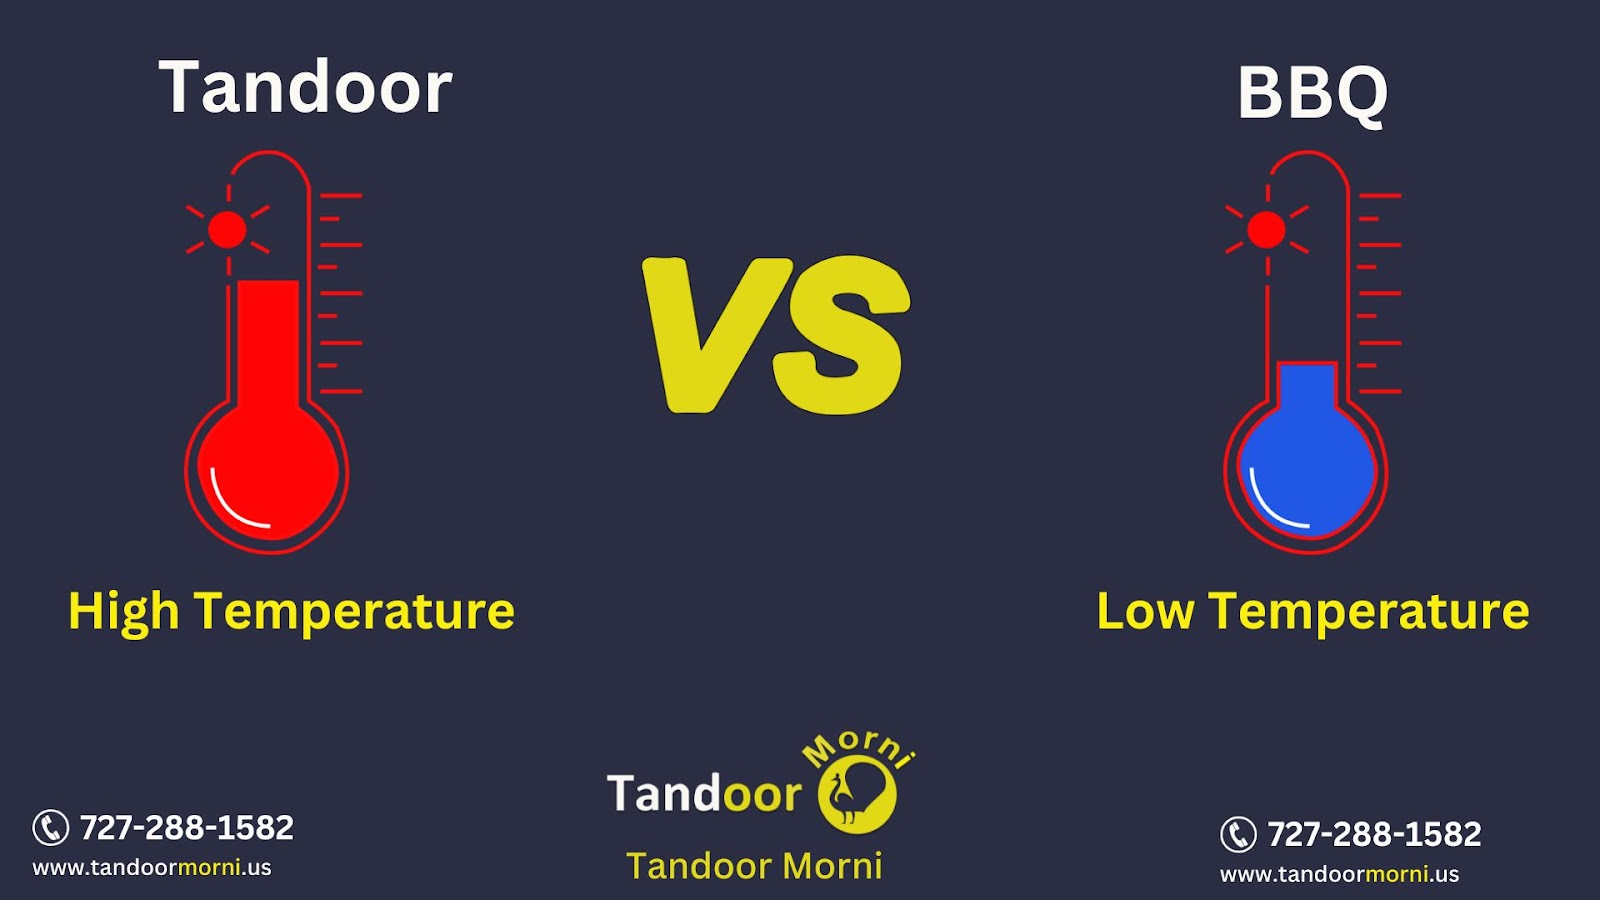 Tandoor ovens use high heat, whereas barbecue grills use low heat.